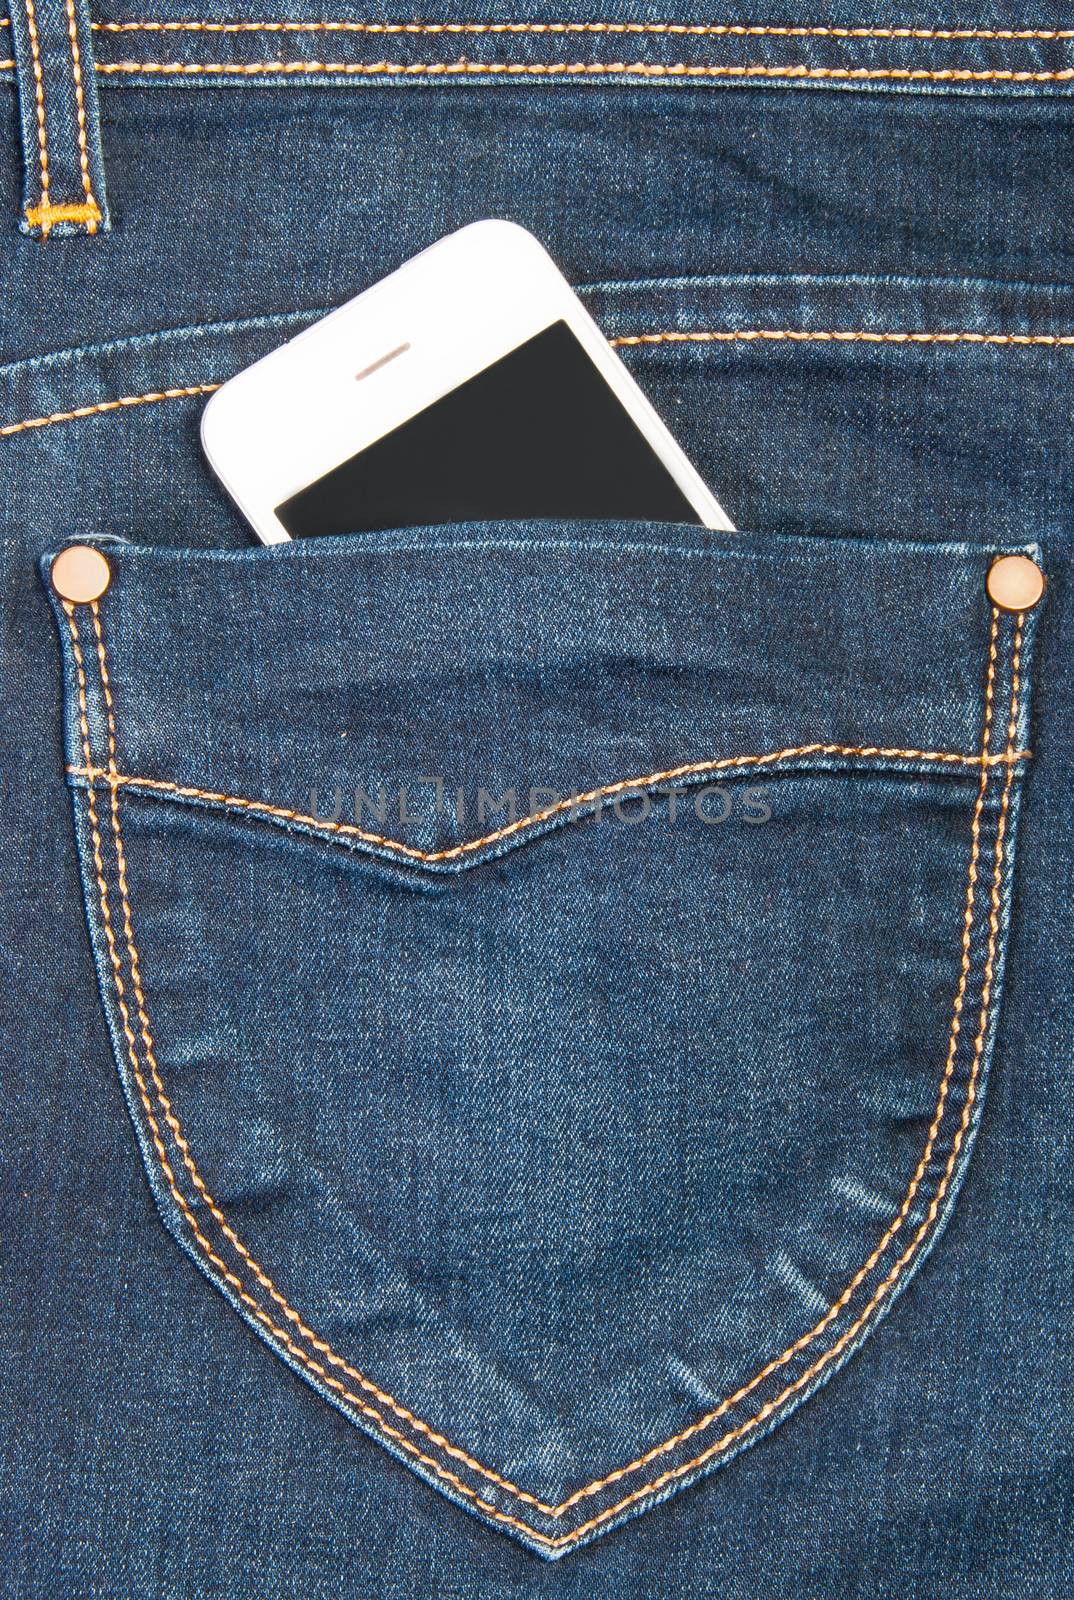 Mobile Phone In Pocket Jeans by Cipariss